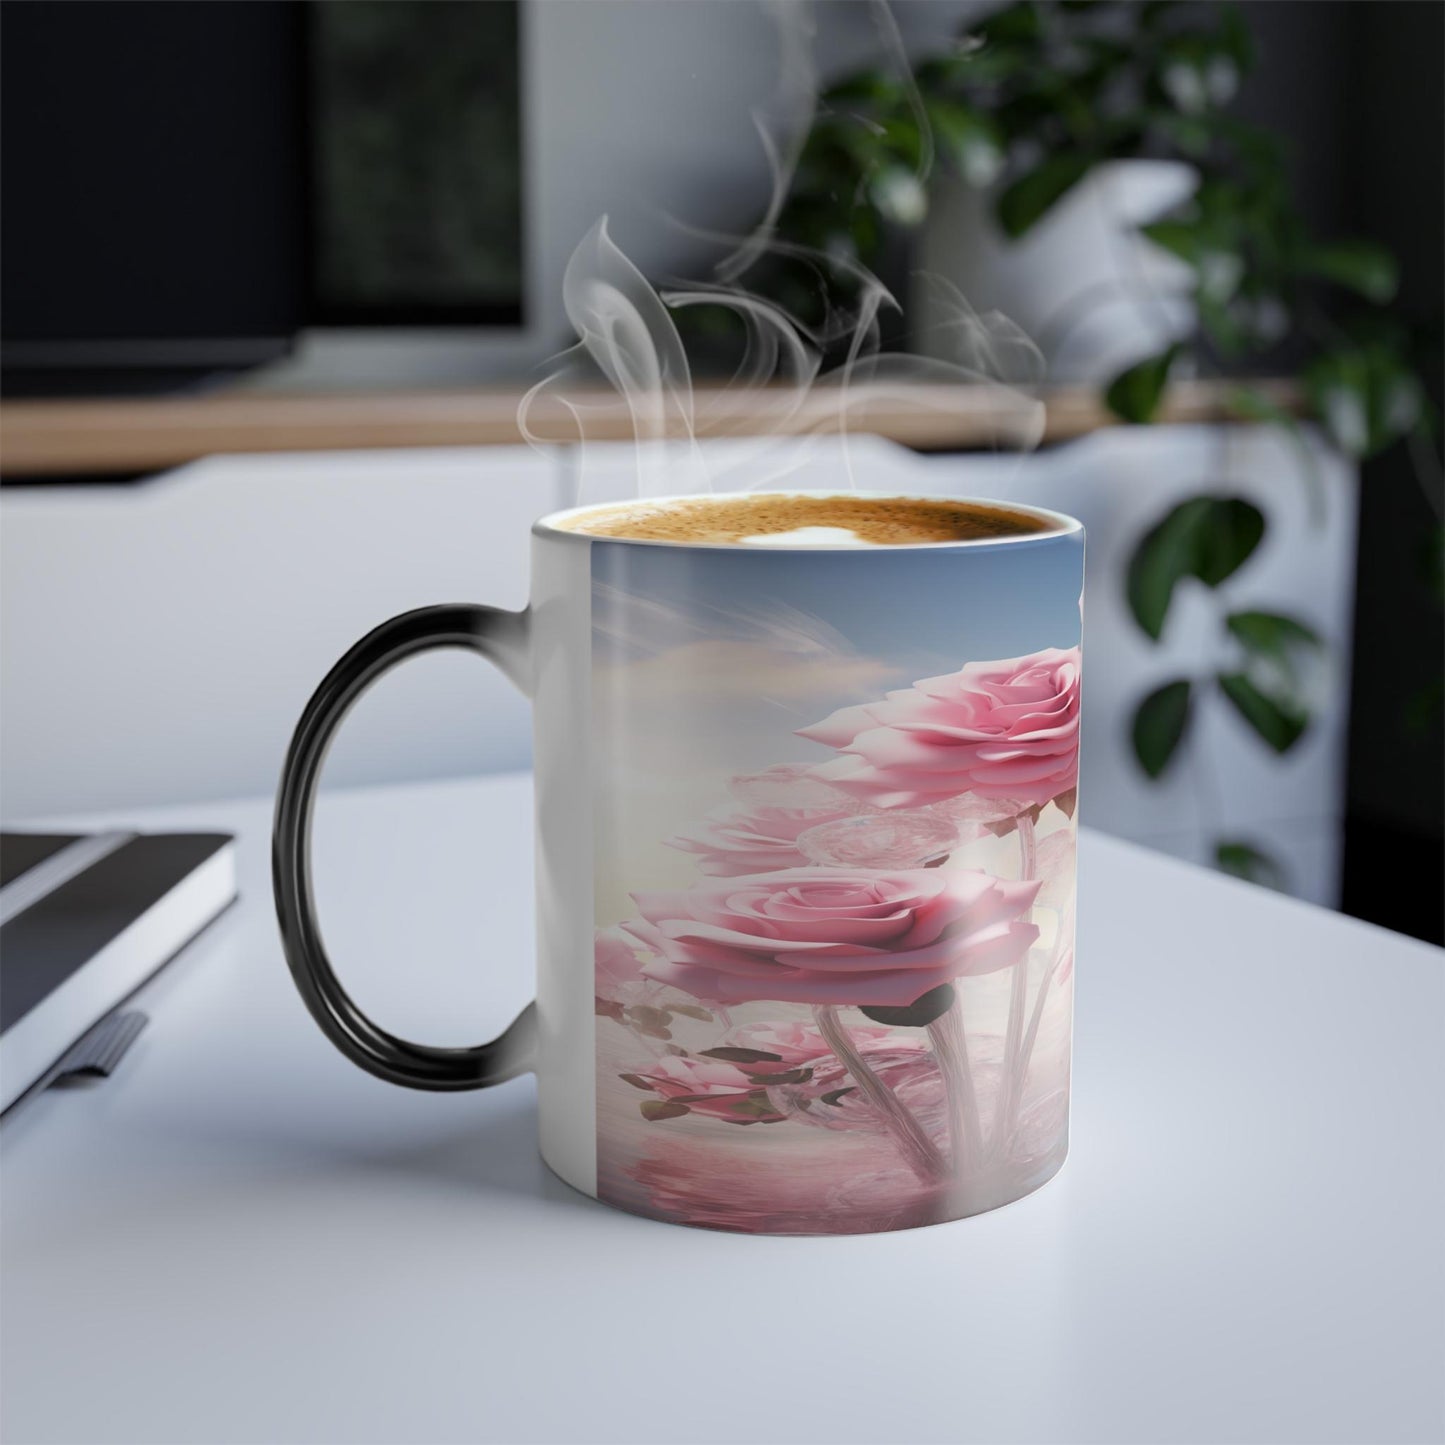 Enchanting Flower Magic Morphing Mug 11oz - Lovely Heat Sensitive Coffee Tea Cup with Flower, Rose, Tree, Heart Designs - Special Gifts for Flower Lovers 15